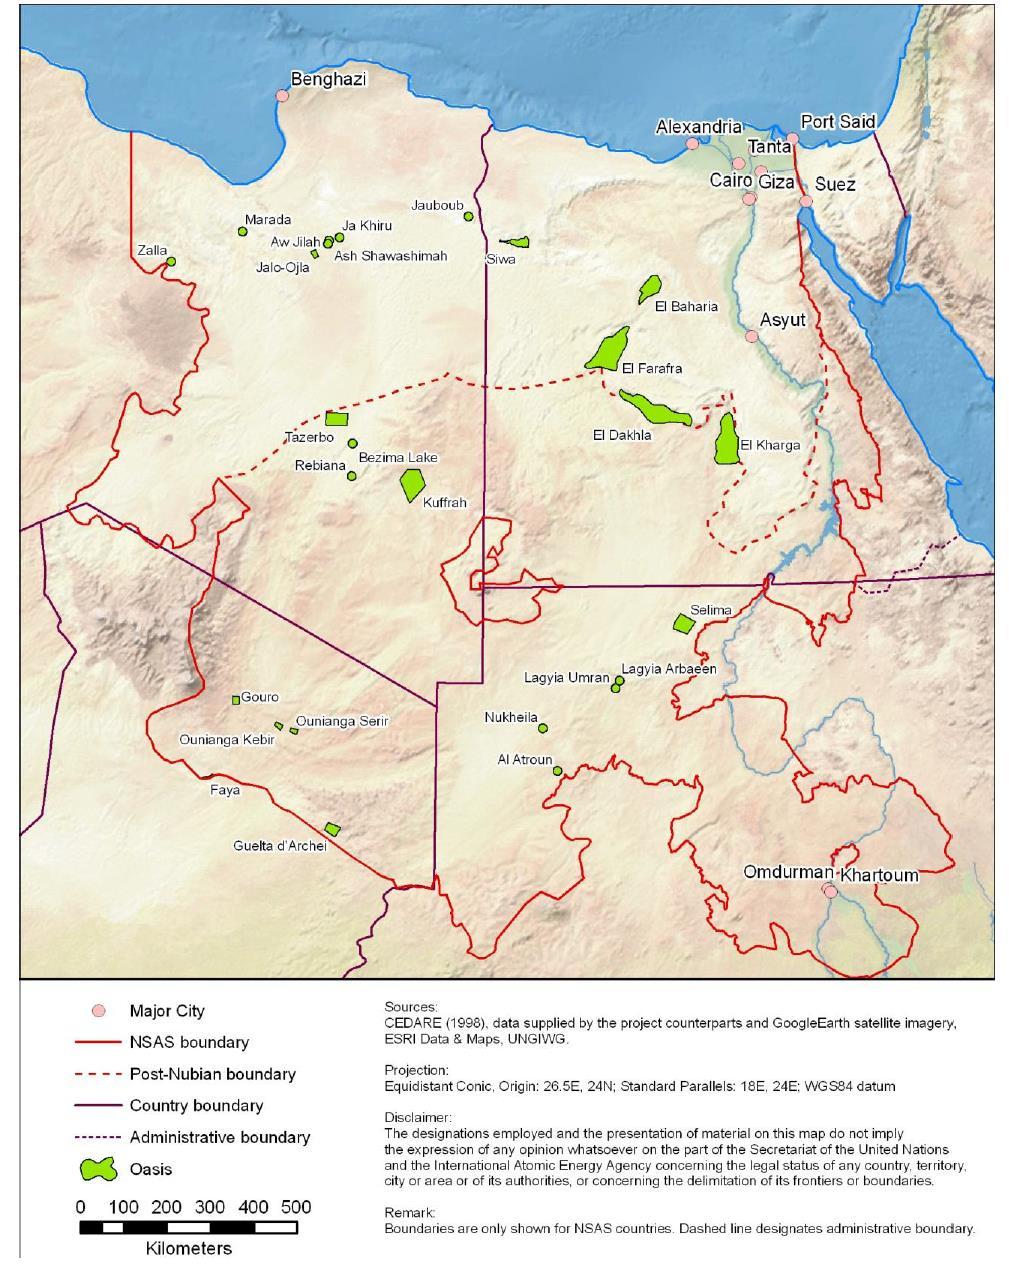 png based on CEDARE 1998 as cited in International Atomic Energy Agency, 2012 Regional Strategic Action Programme For the Nubian Sandstone Aquifer